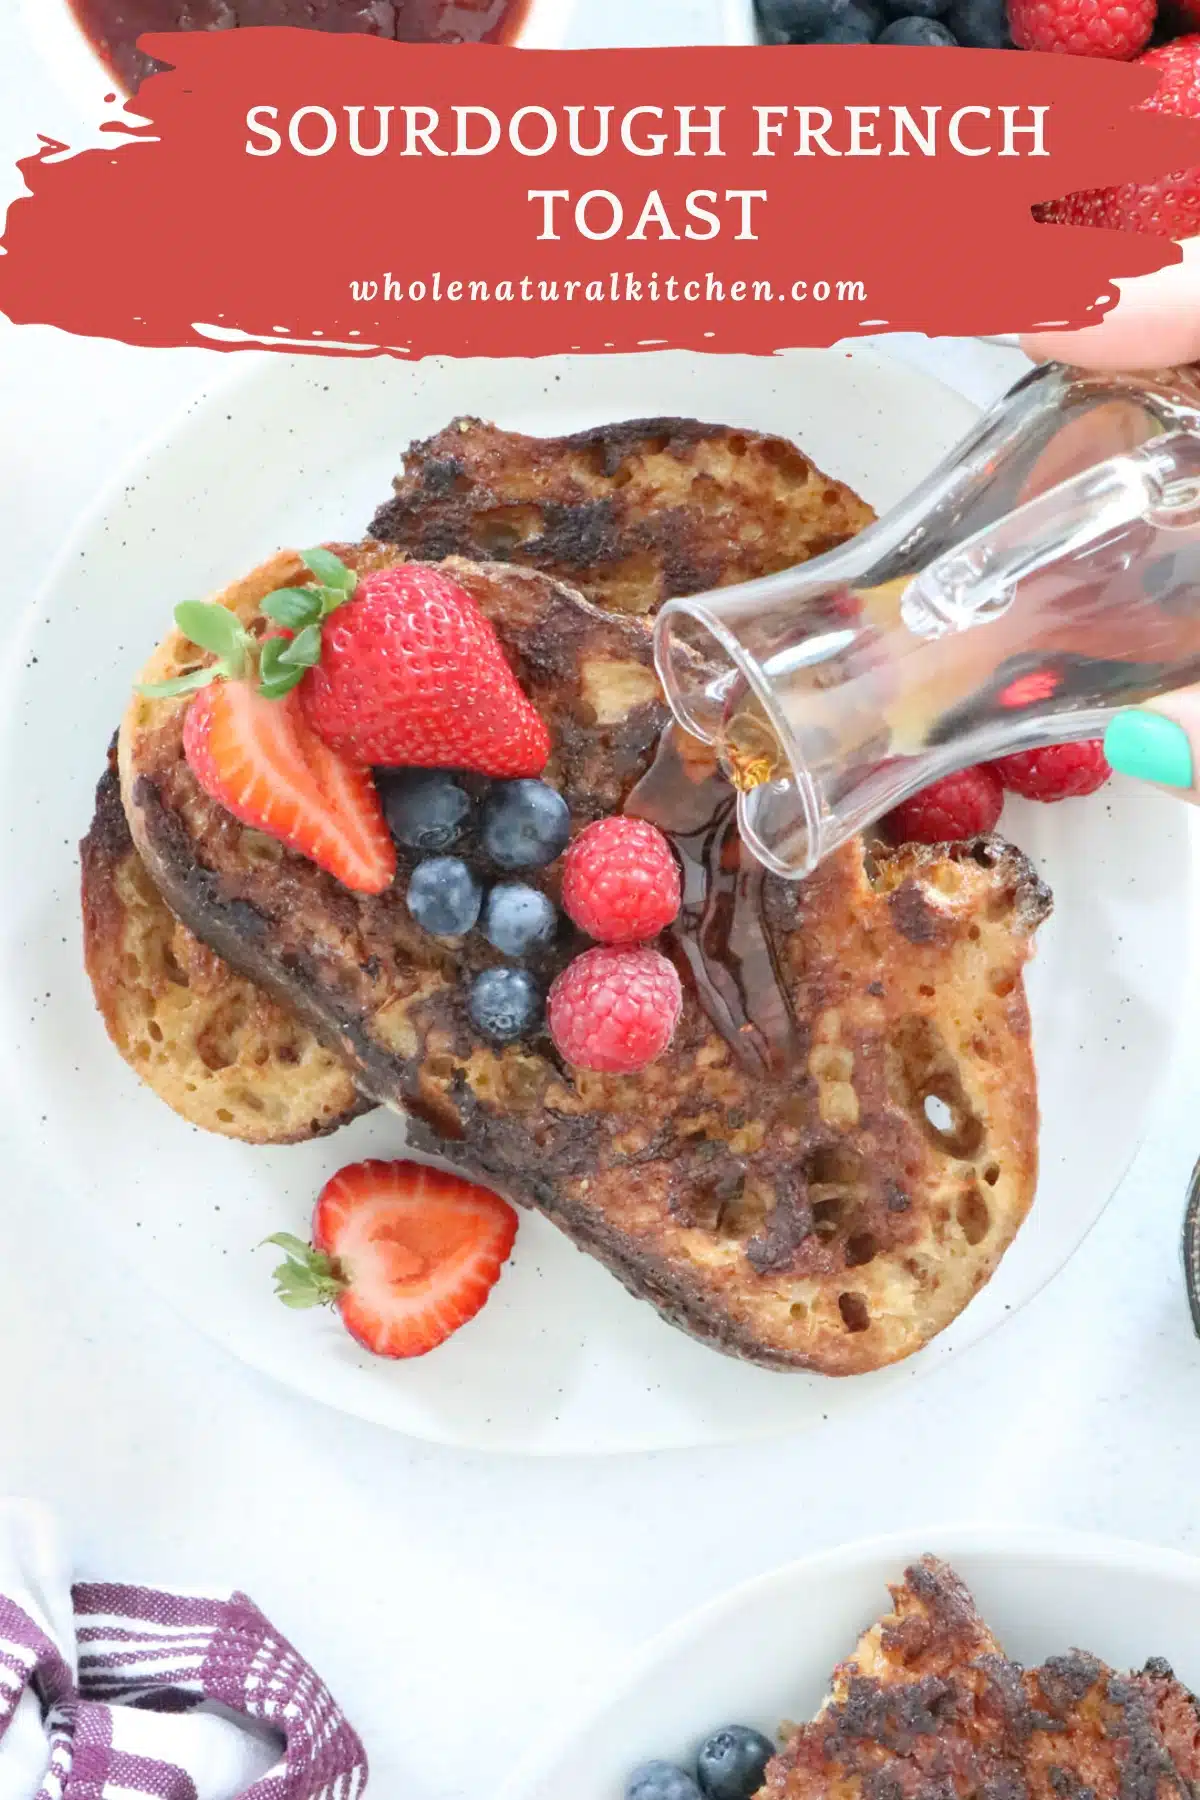 A Pinterest poster showing the name of the recipe and website at the top, and a plate of french toast underneath.